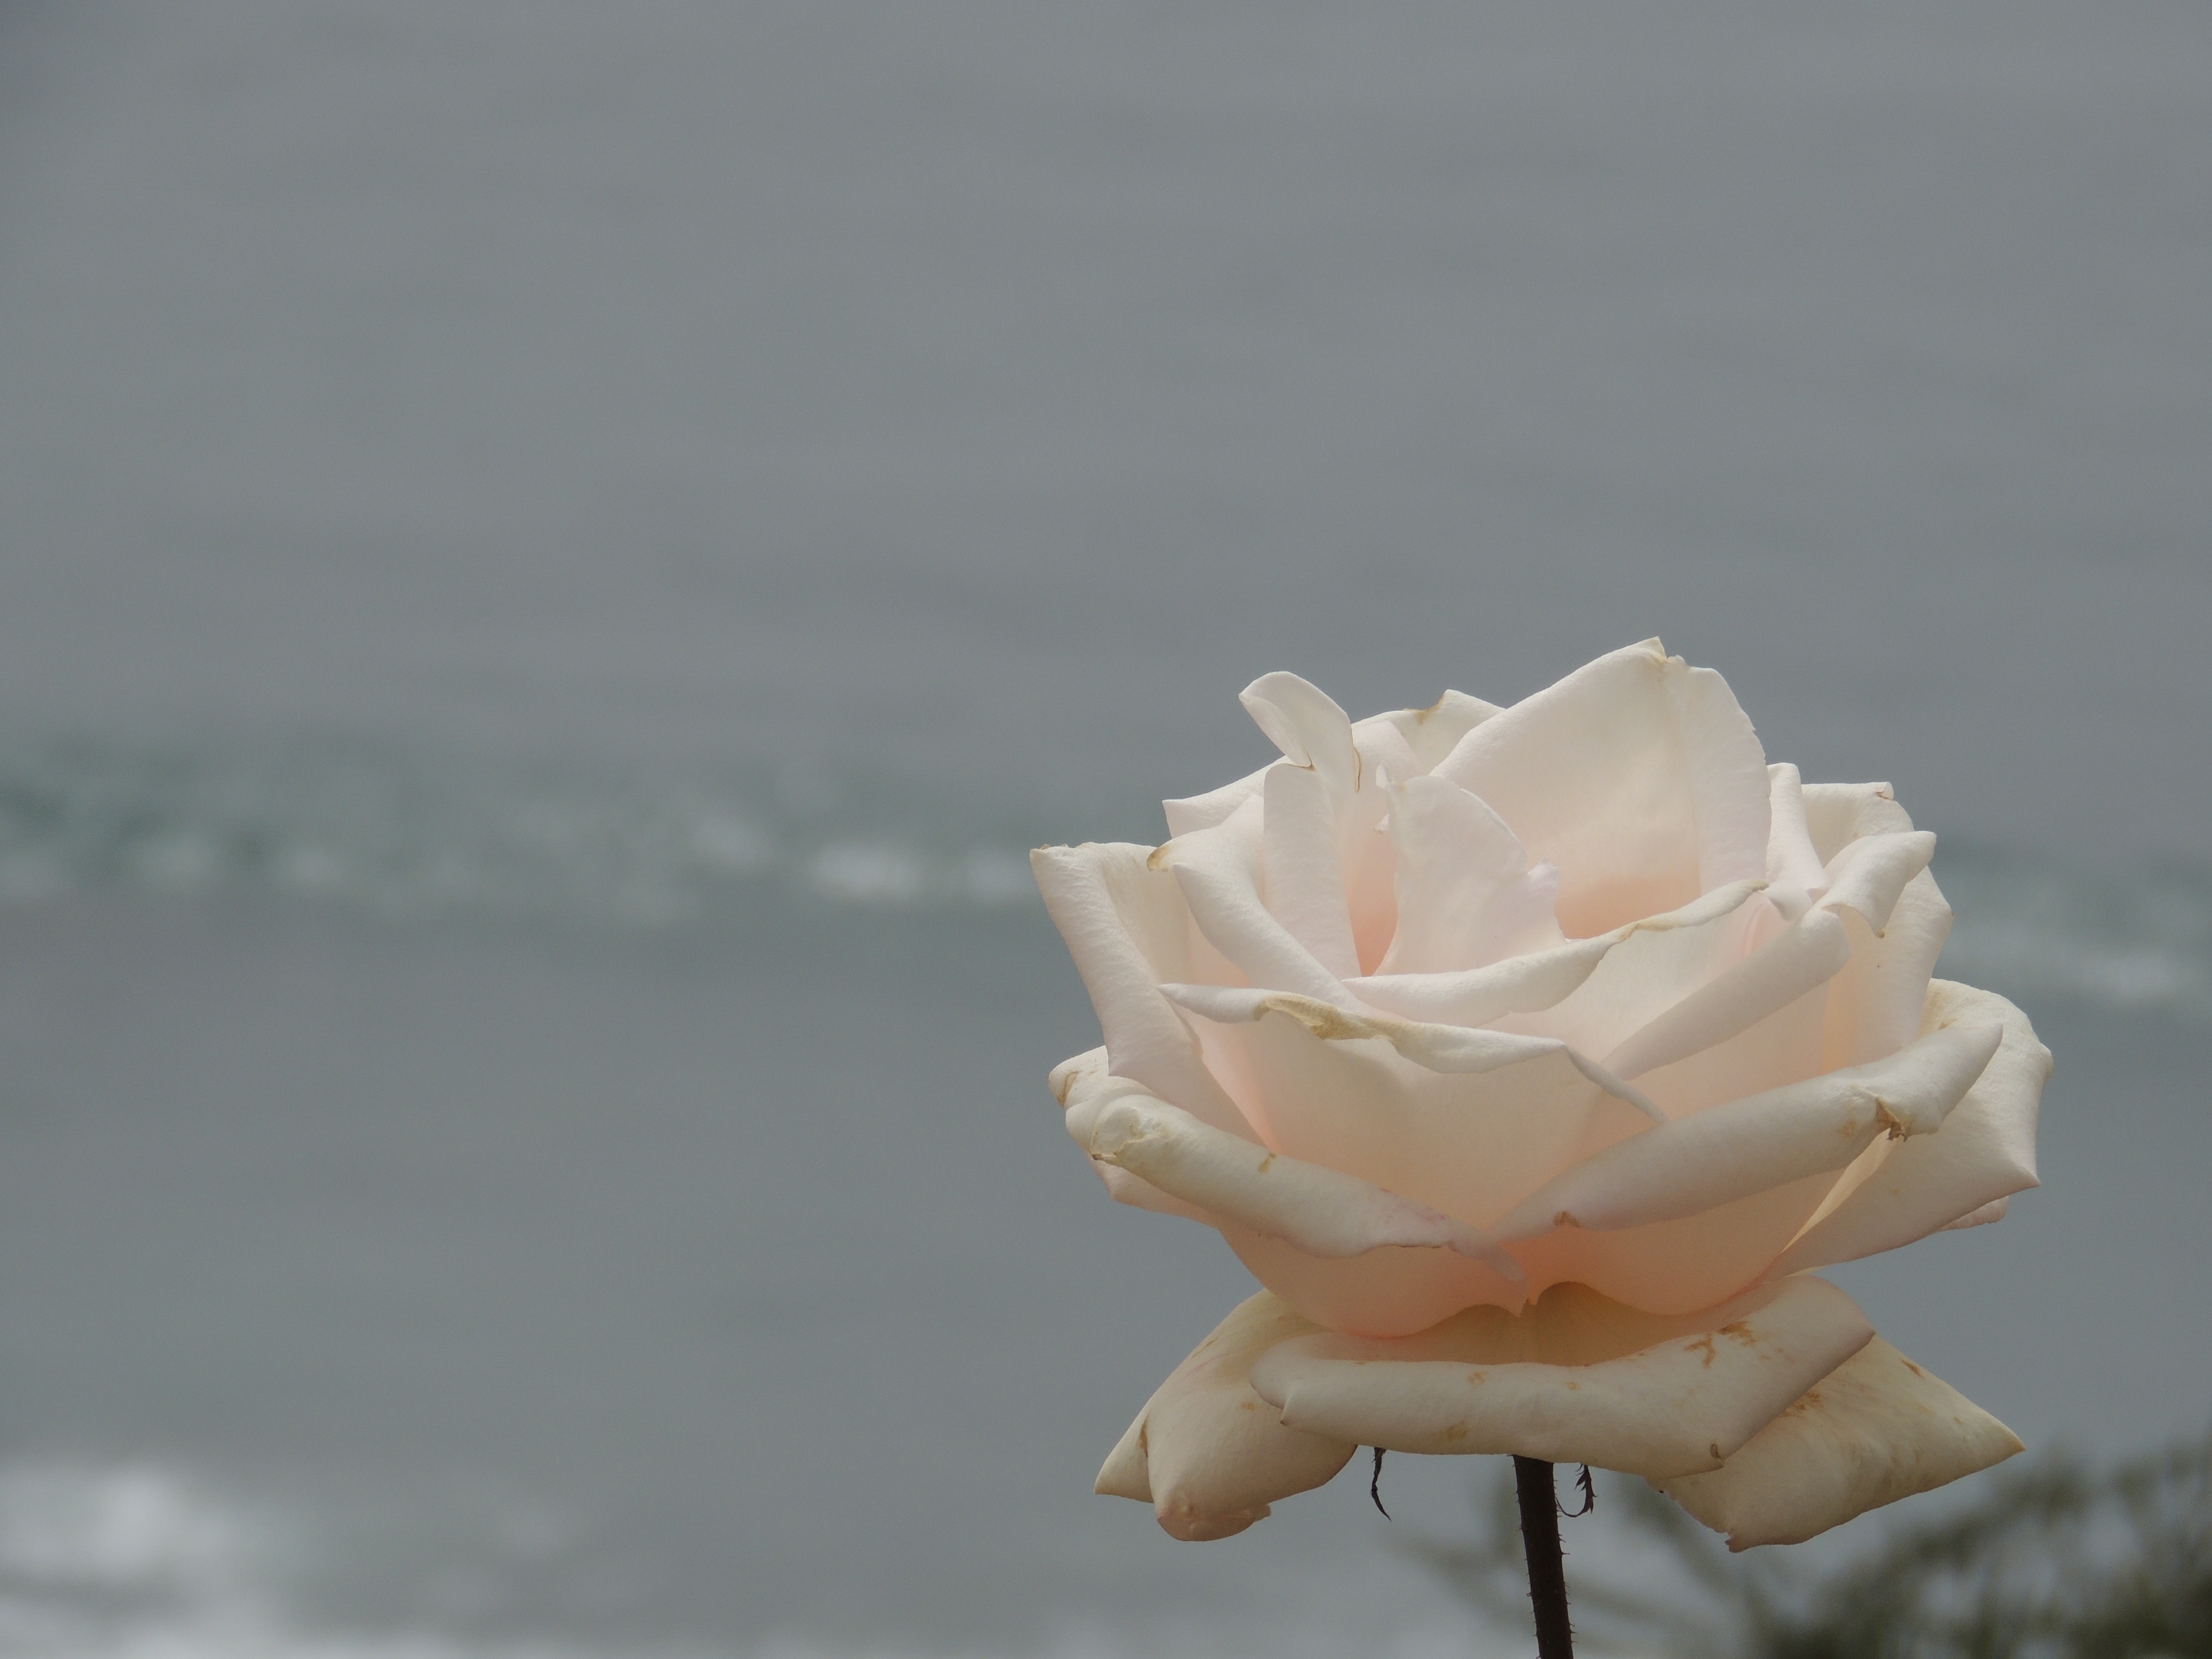 White Flower with Waves in the Distance, Laguna Beach